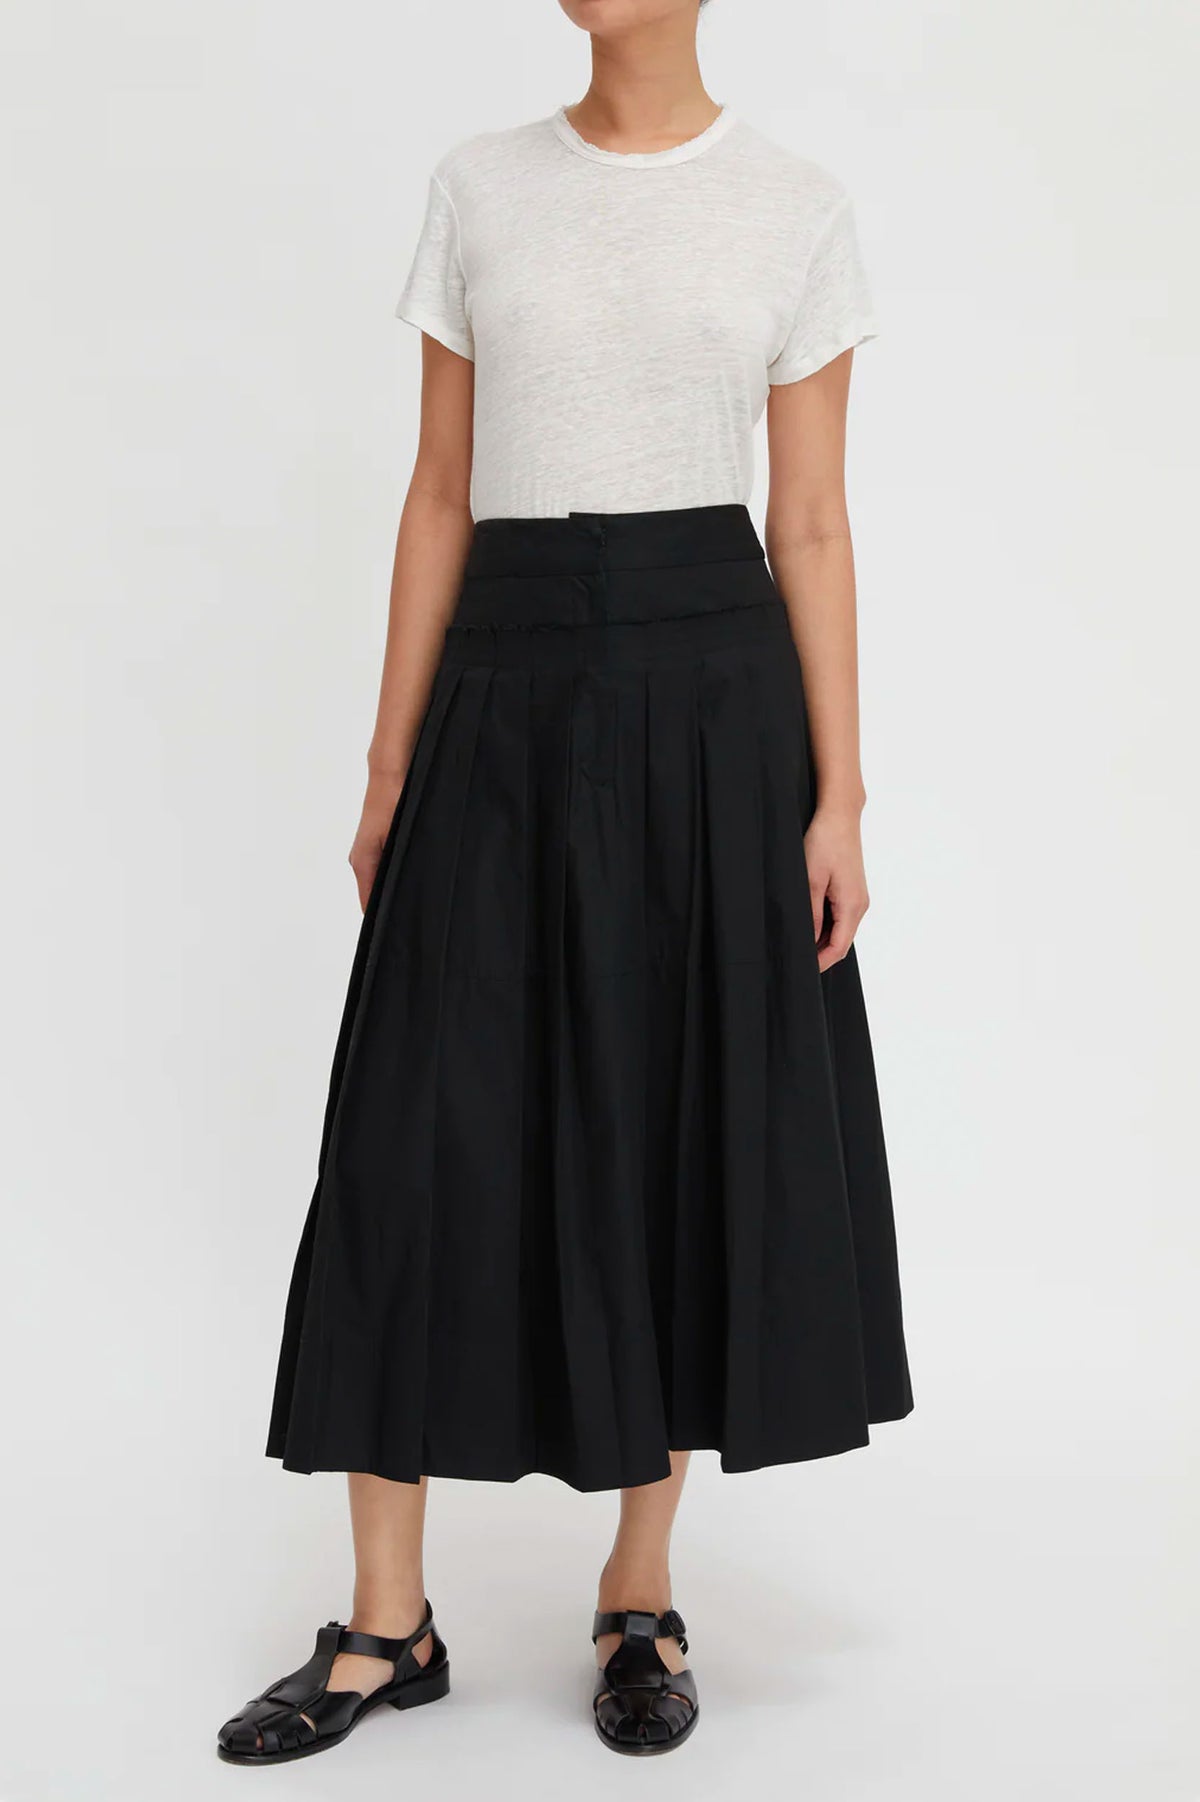 Andy Skirt in Black